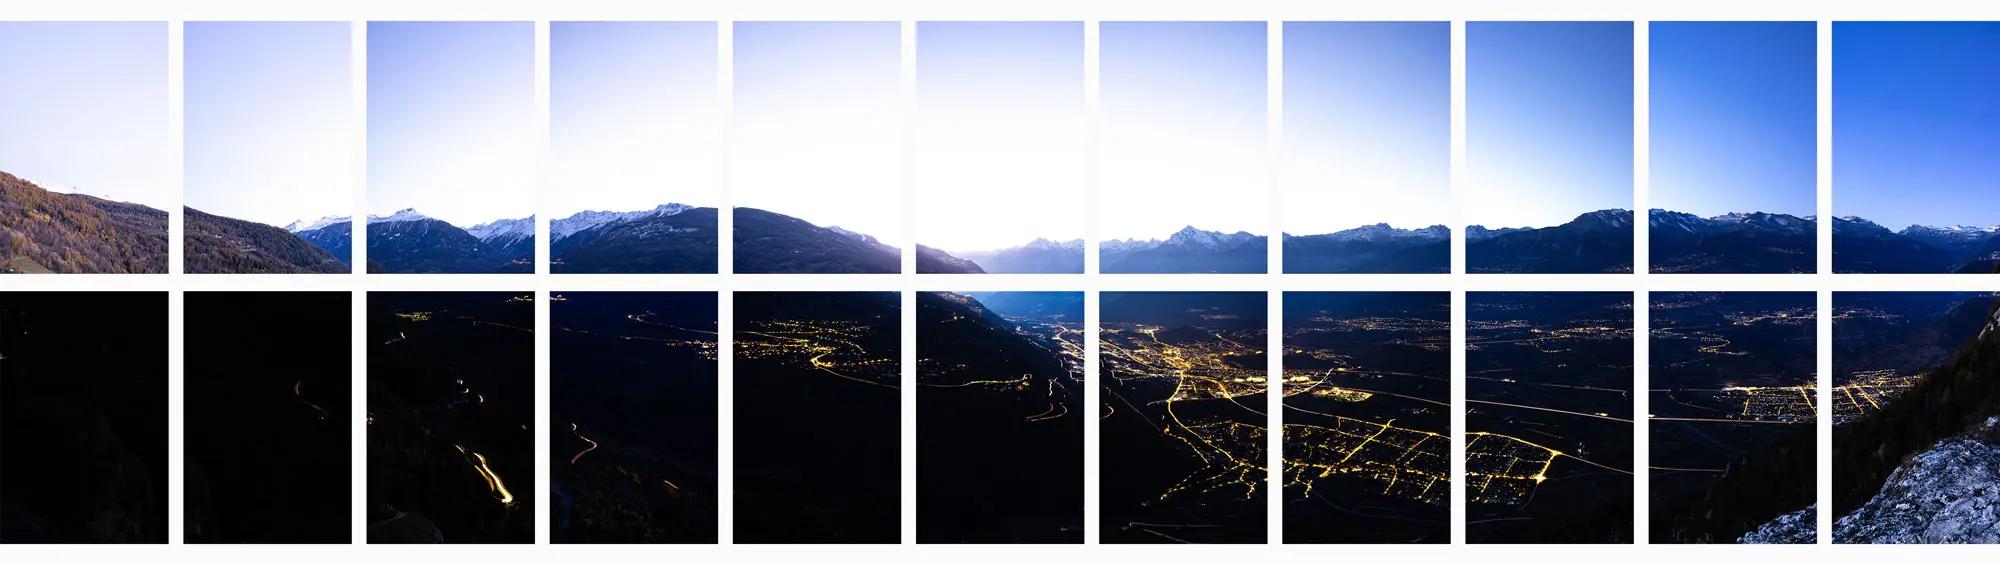 Unprocessed single images of a multiline panorama (2 x 11 images) from the Rhone valley in Switzerland